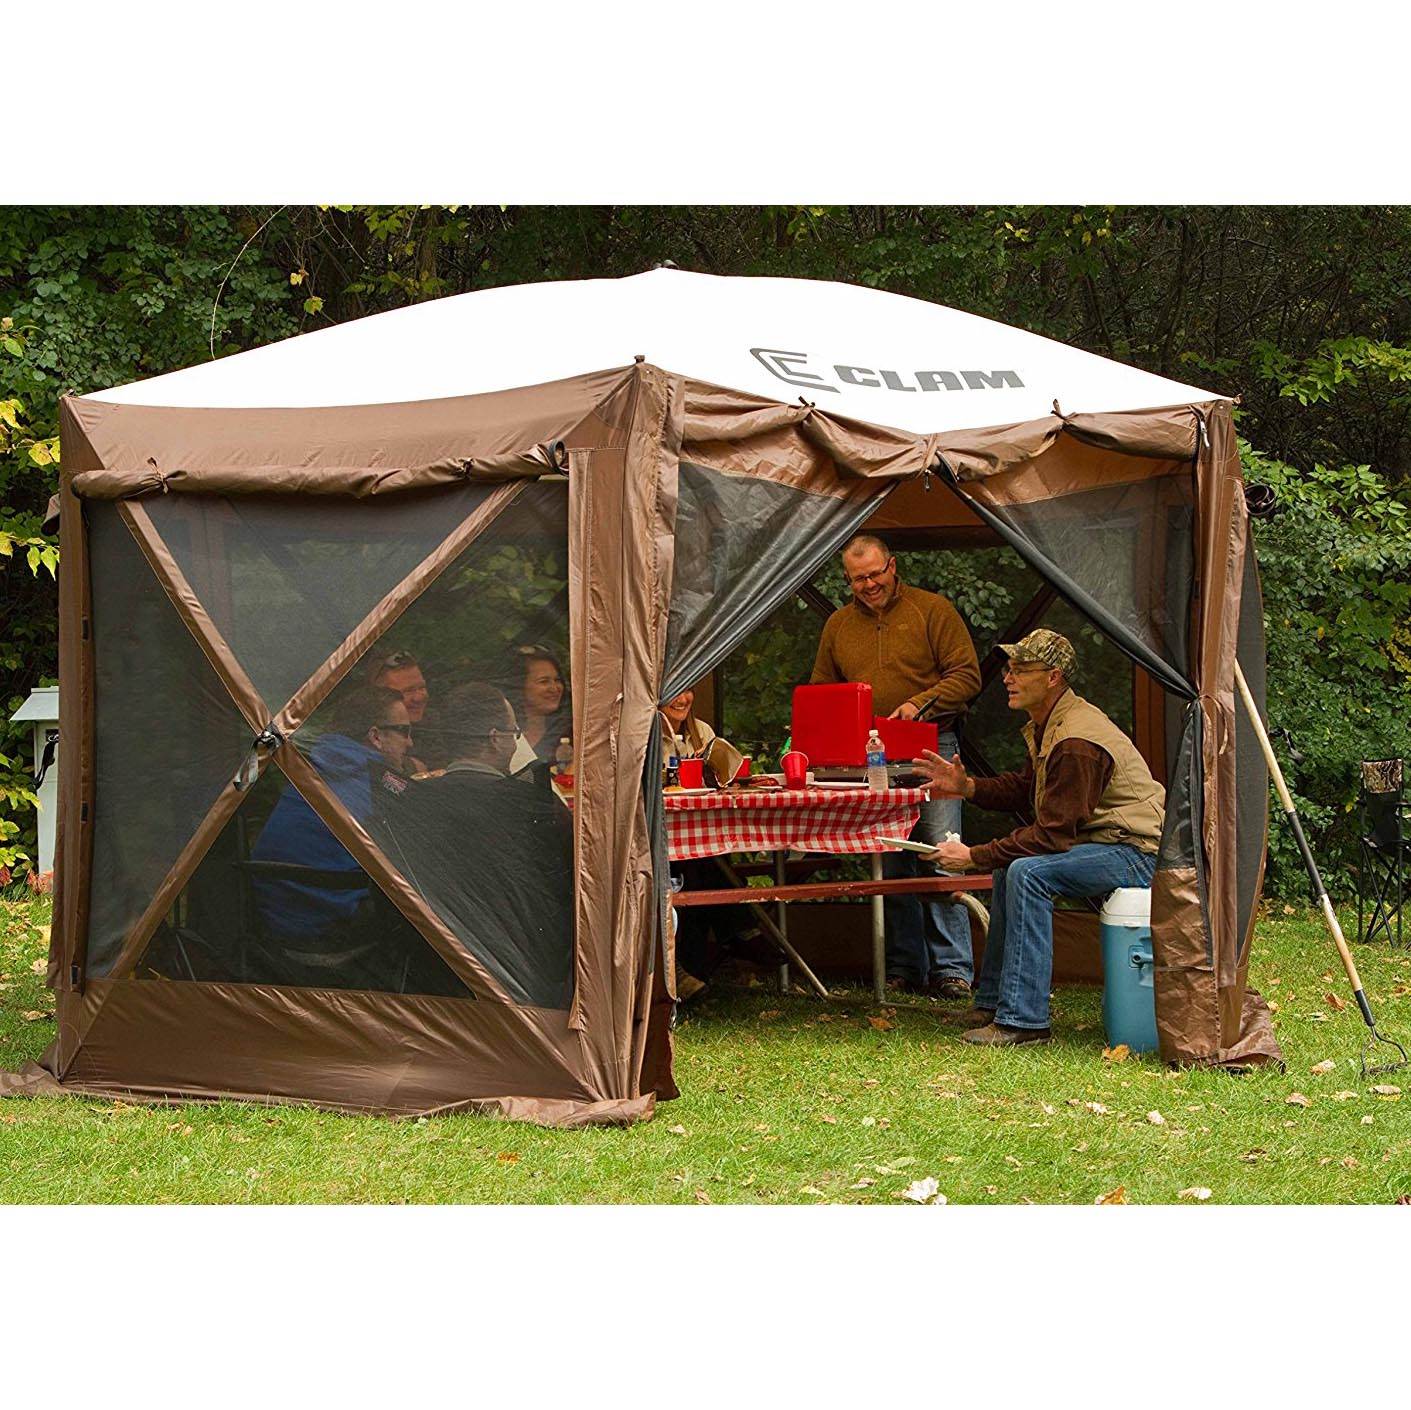 Clam Outdoors CLAM Quickset Pavilion 12.5-ft Portable Outdoor